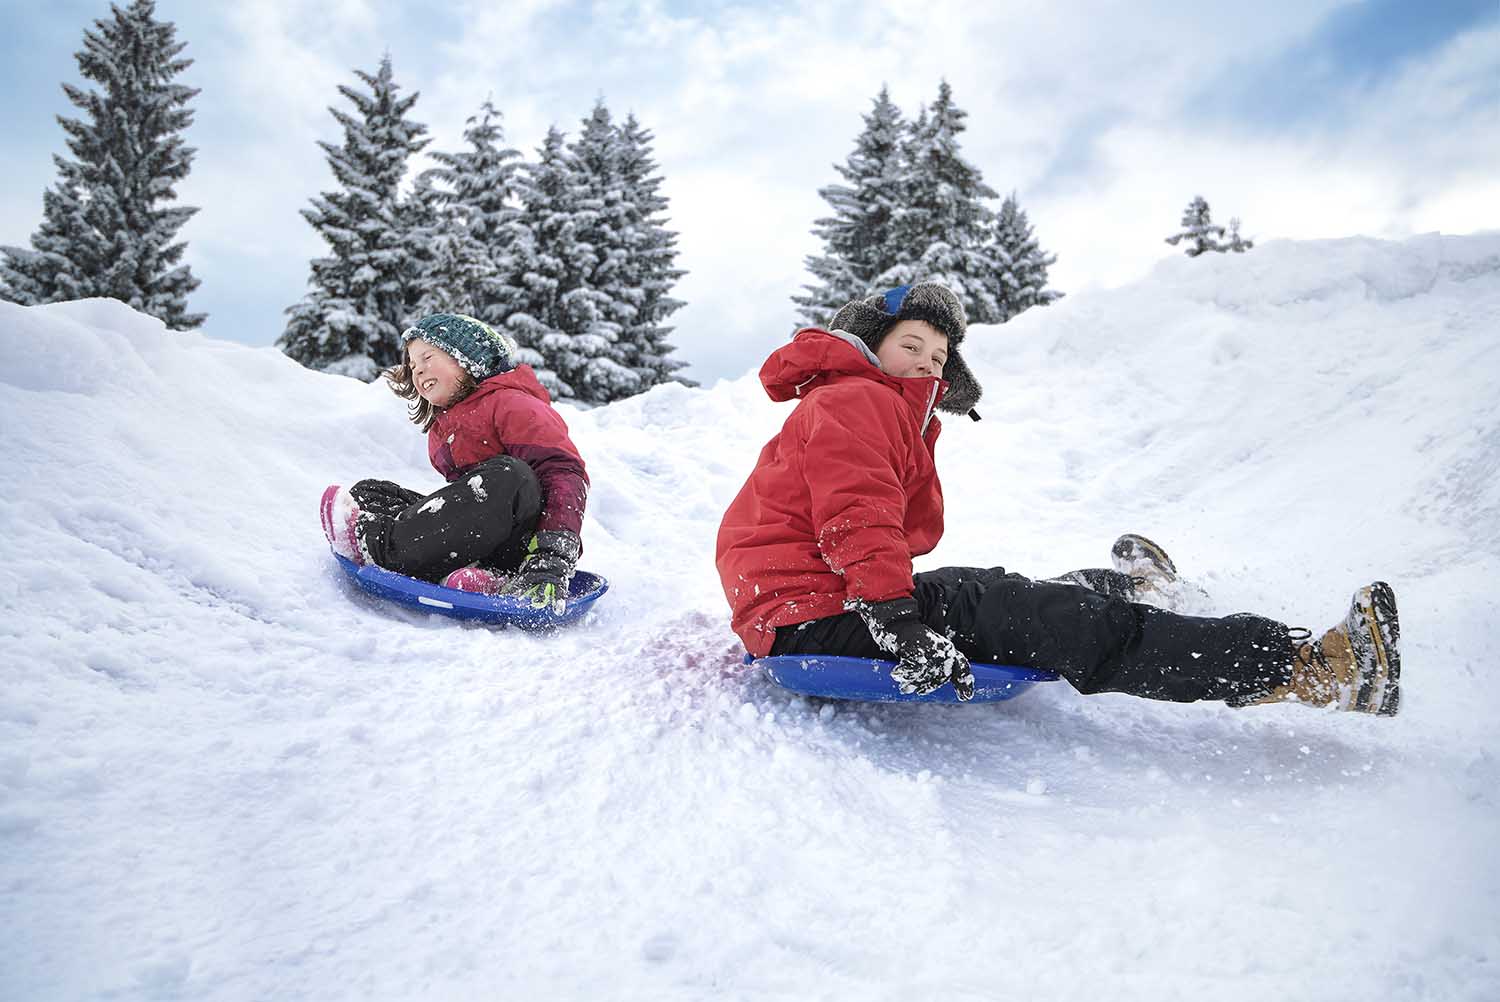 Young boy and girl sledding down a snowy hill